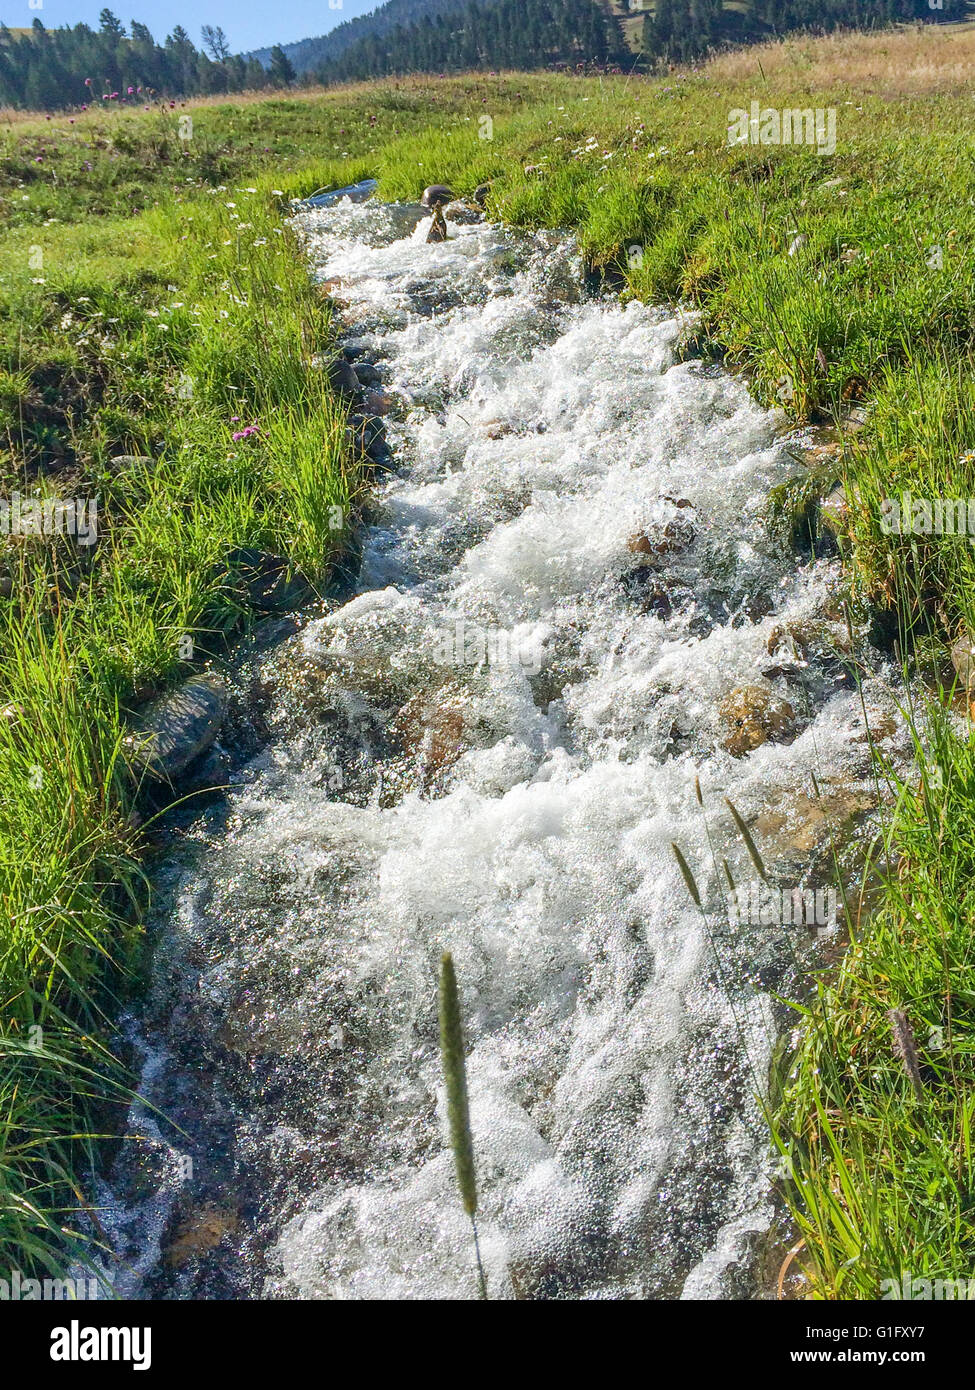 gushing uninhibited mountain stream of clear and clean water Stock Photo